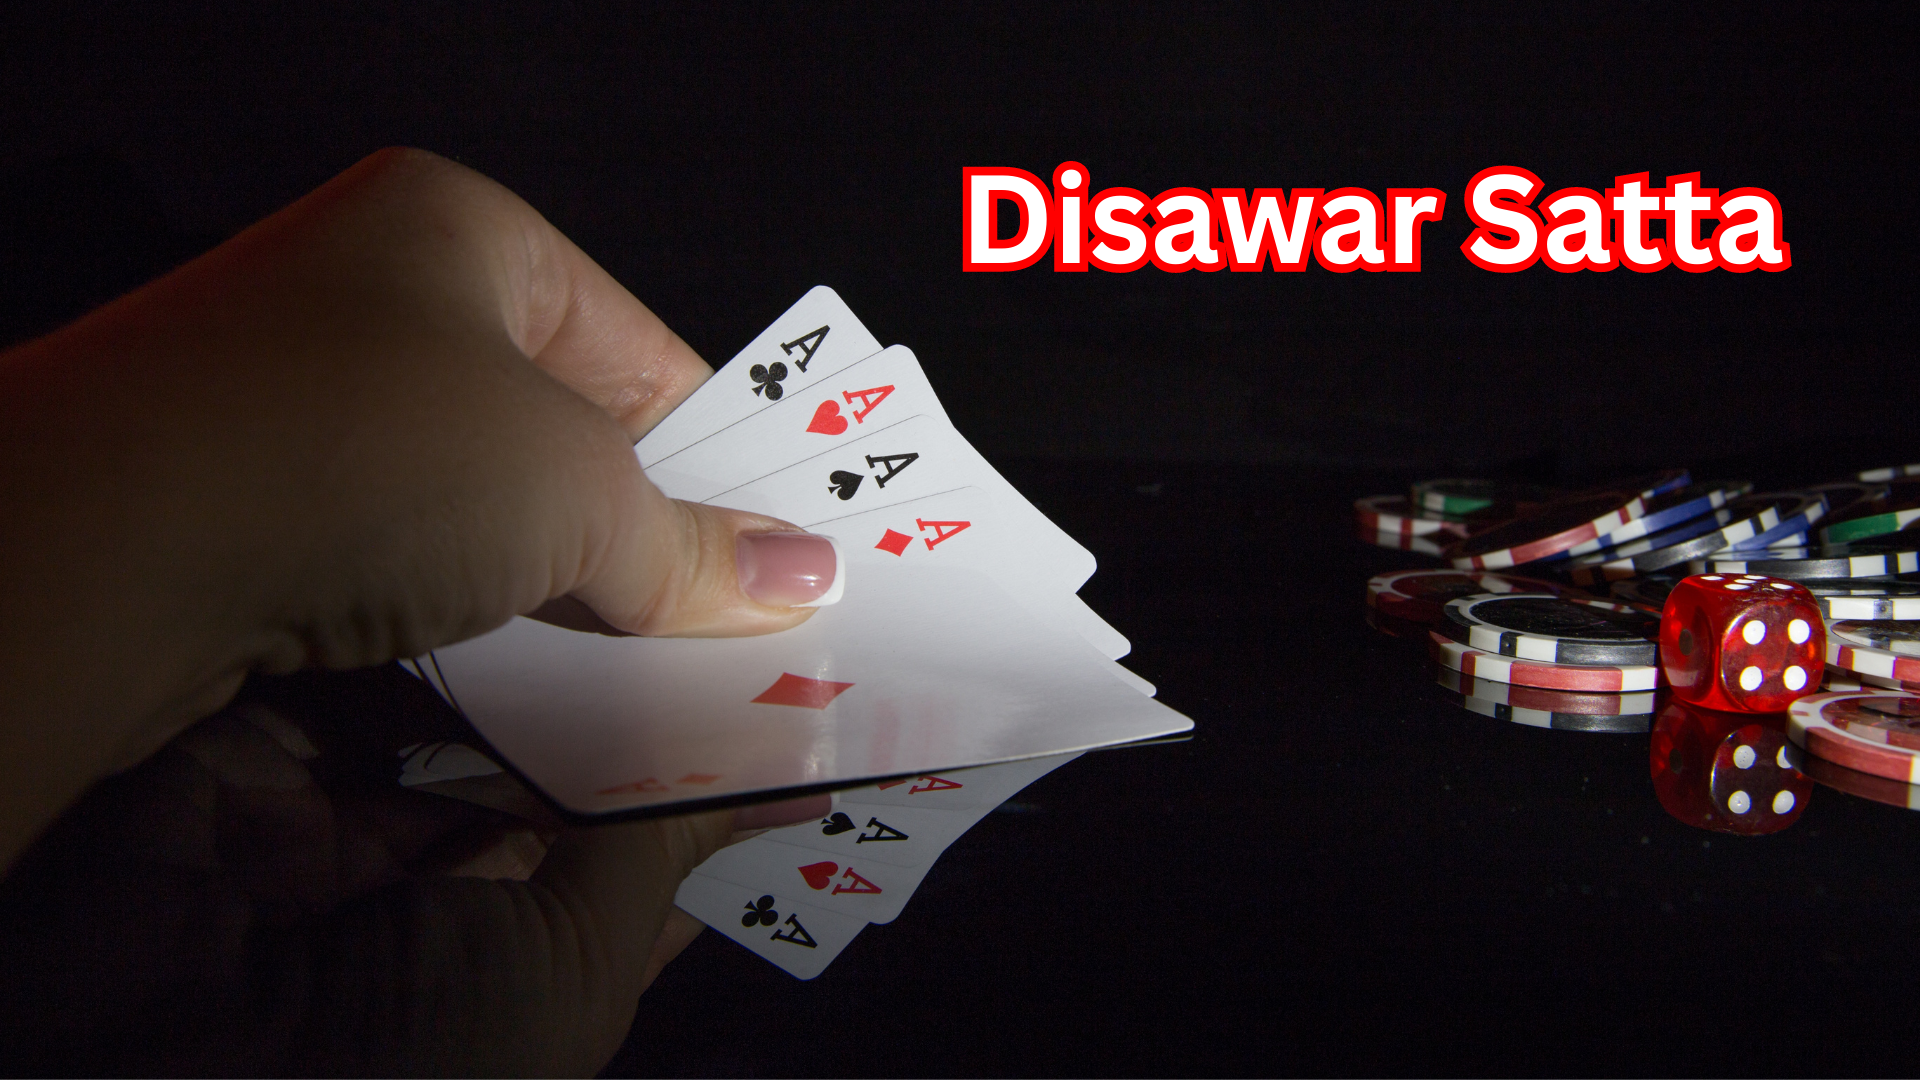 Some important  facts about disawar satta and how to play it 